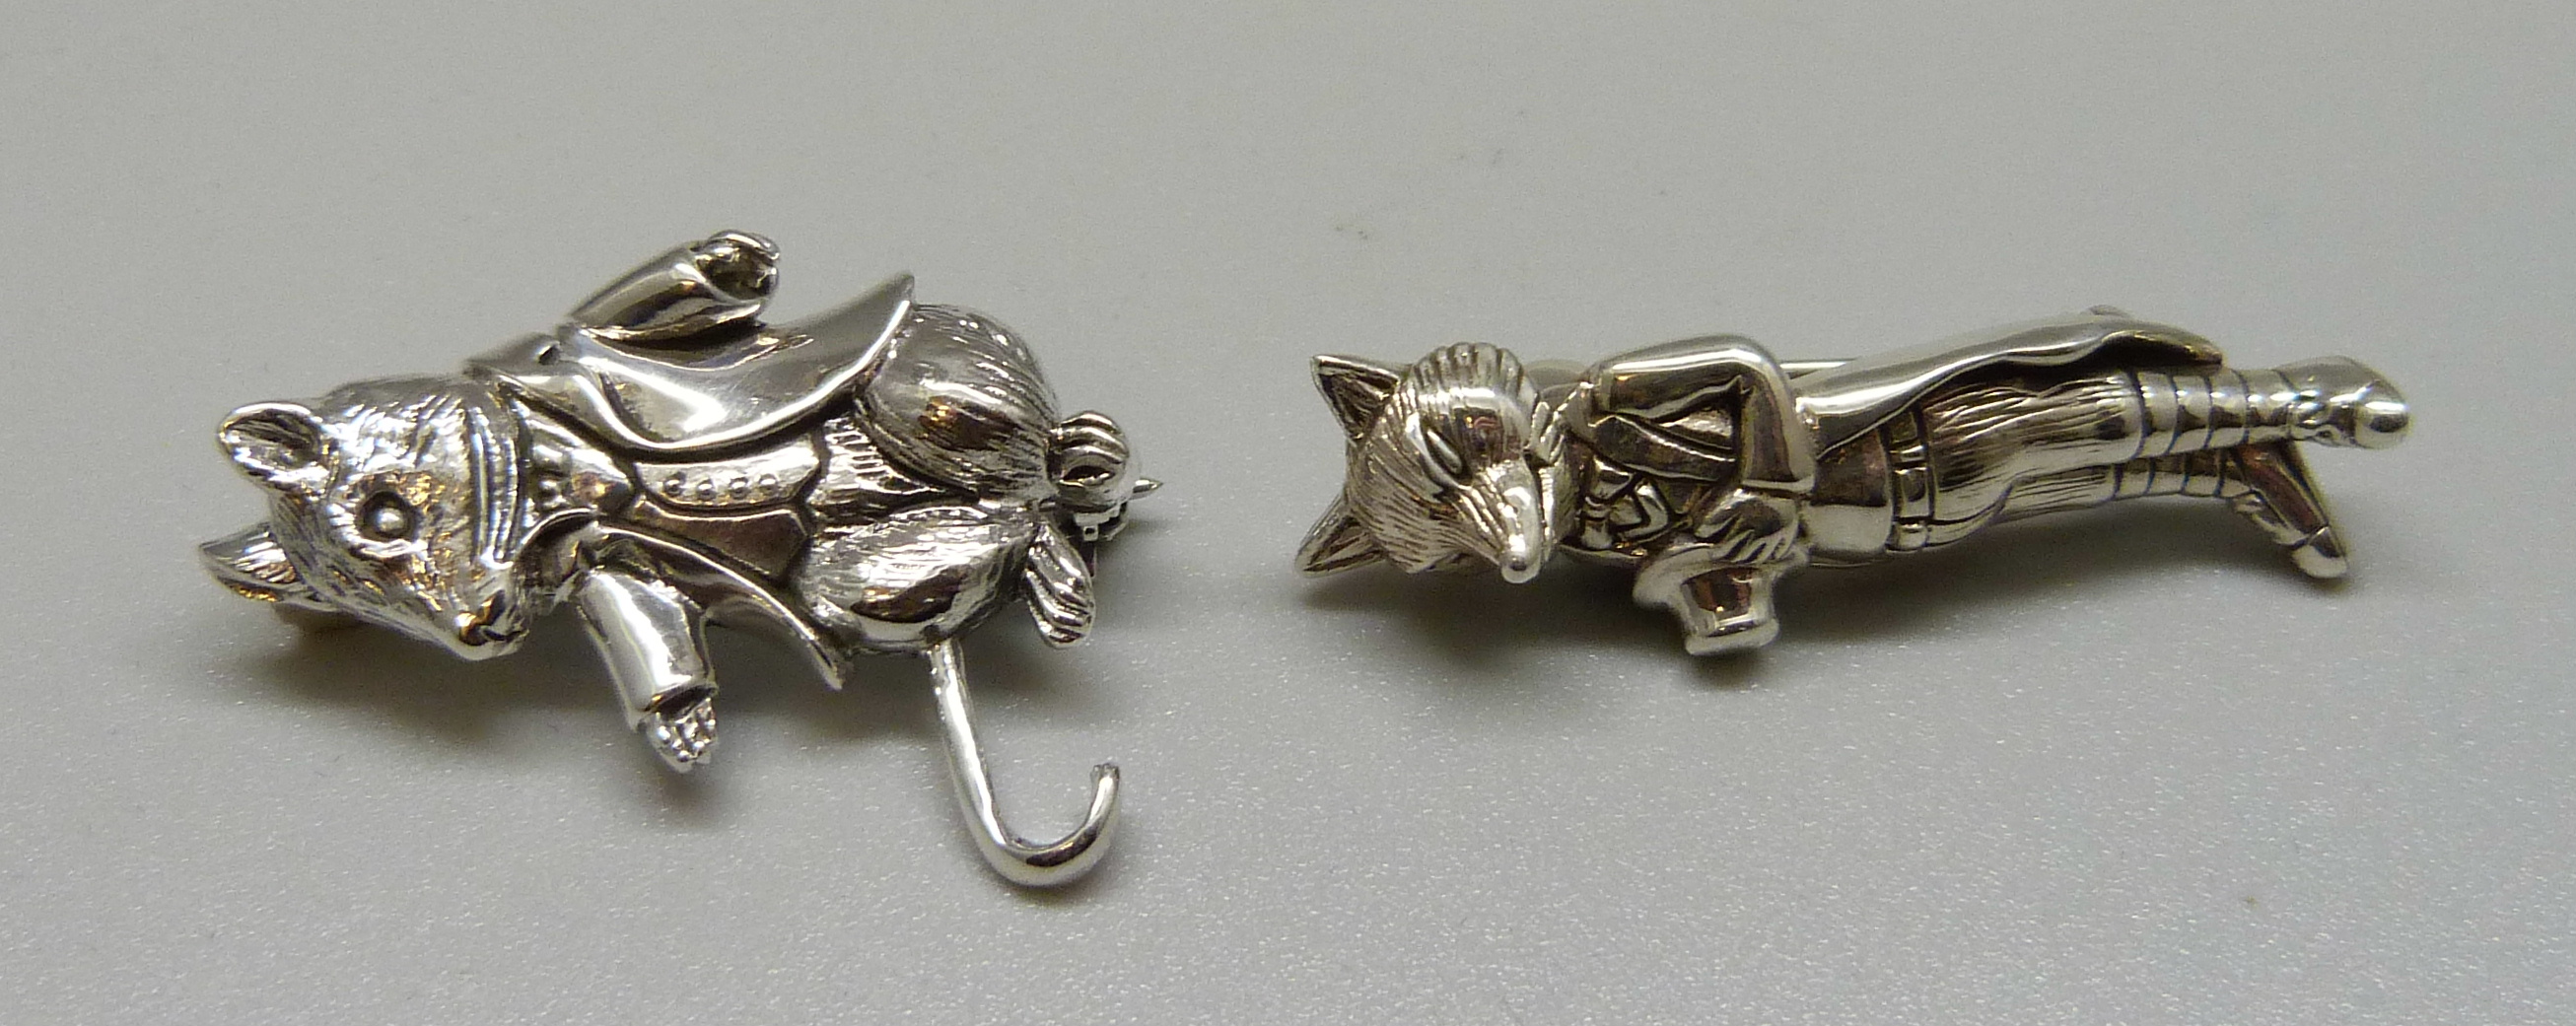 A silver gentleman fox brooch and a silver mouse brooch, 13.7g